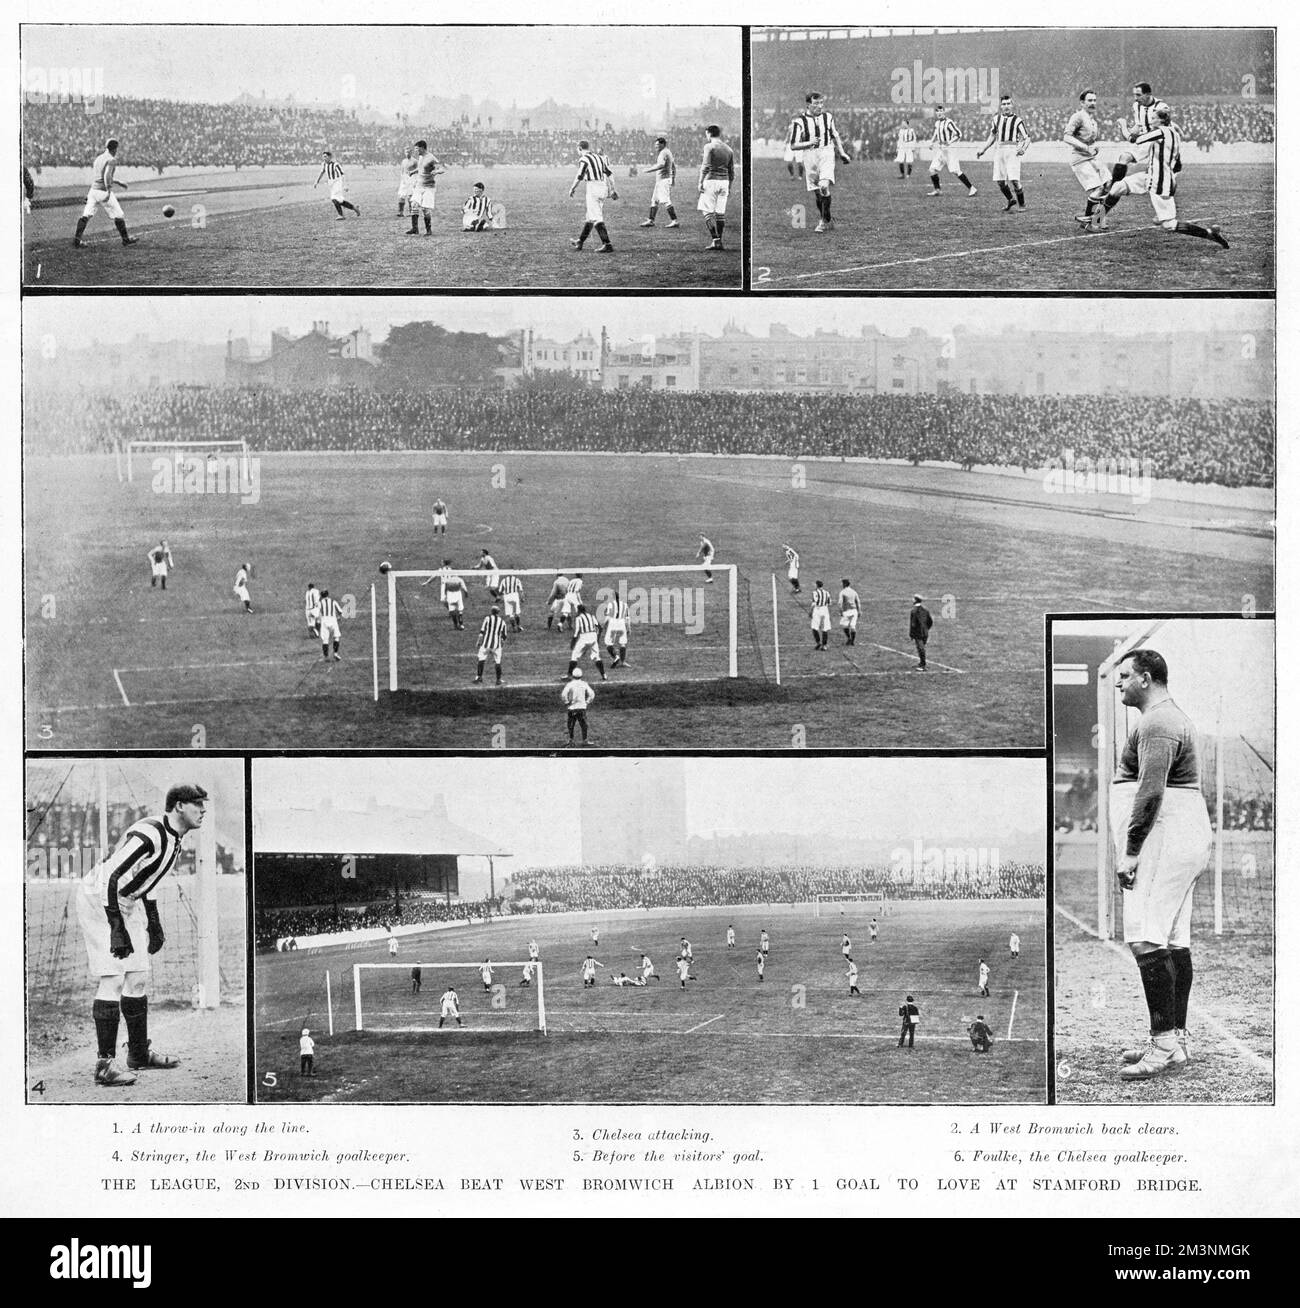 A montage of photographs showing action from the fixture between Chelsea and West Bromwich Albion, in the Second Division of the Football League, played at Chelsea's home ground, Stamford Bridge. The match was won 1-0 by Chelsea.  This was Chelsea's first season in the Football League, the club having only been founded in March 1905. They finished third in the division, missing out on promotion to to the top level by one place, though several points separated them from the top two clubs. West Bromwich Albion finished fourth.  Two of the photographs in this montage show the respective goalkeepe Stock Photo